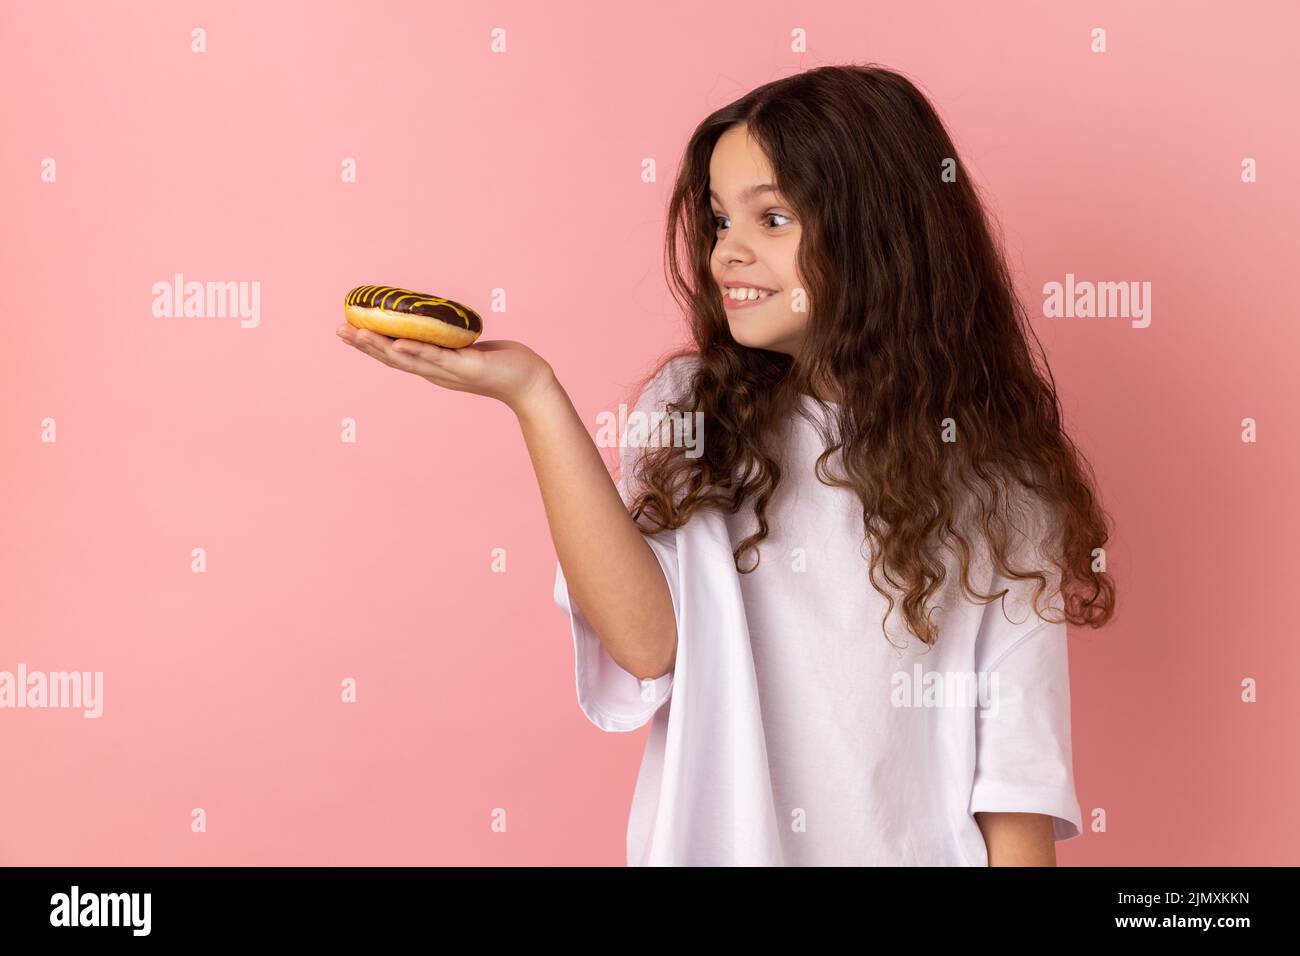 Portrait of hungry little girl wearing white T-shirt looking at donut with excited expression and want to eat confectionary, junk food. Indoor studio shot isolated on pink background. Stock Photo